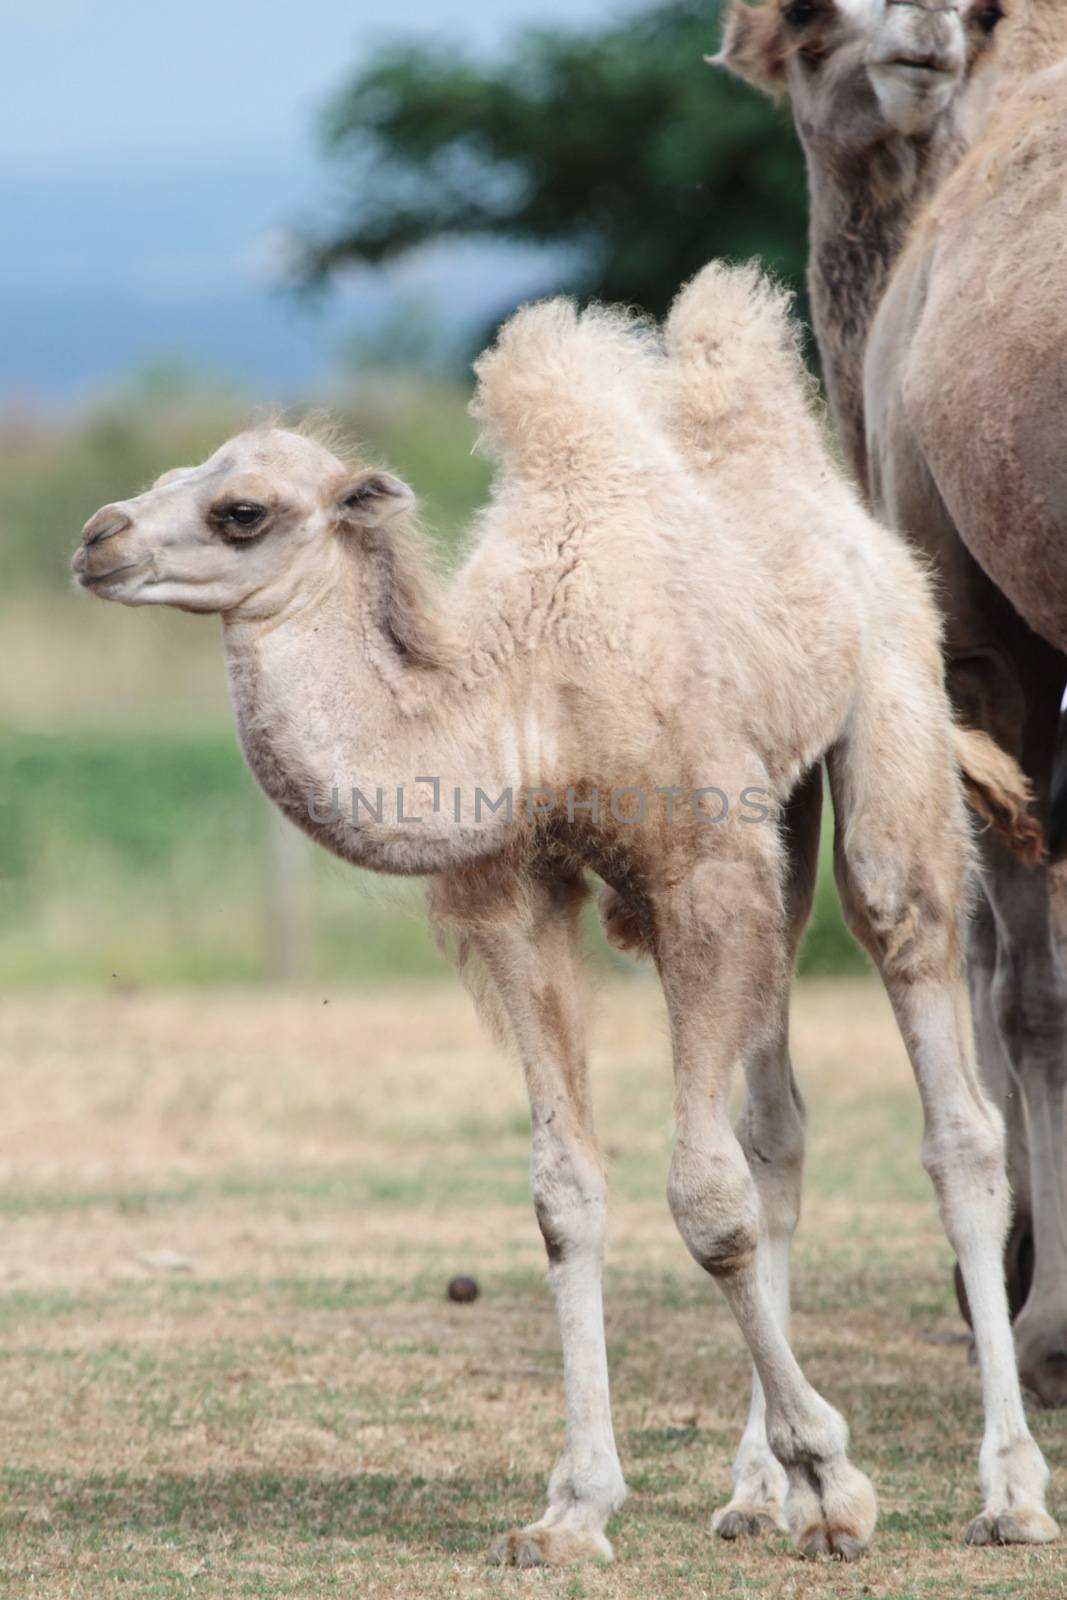 Camel baby calf standing on the ground next to his mother